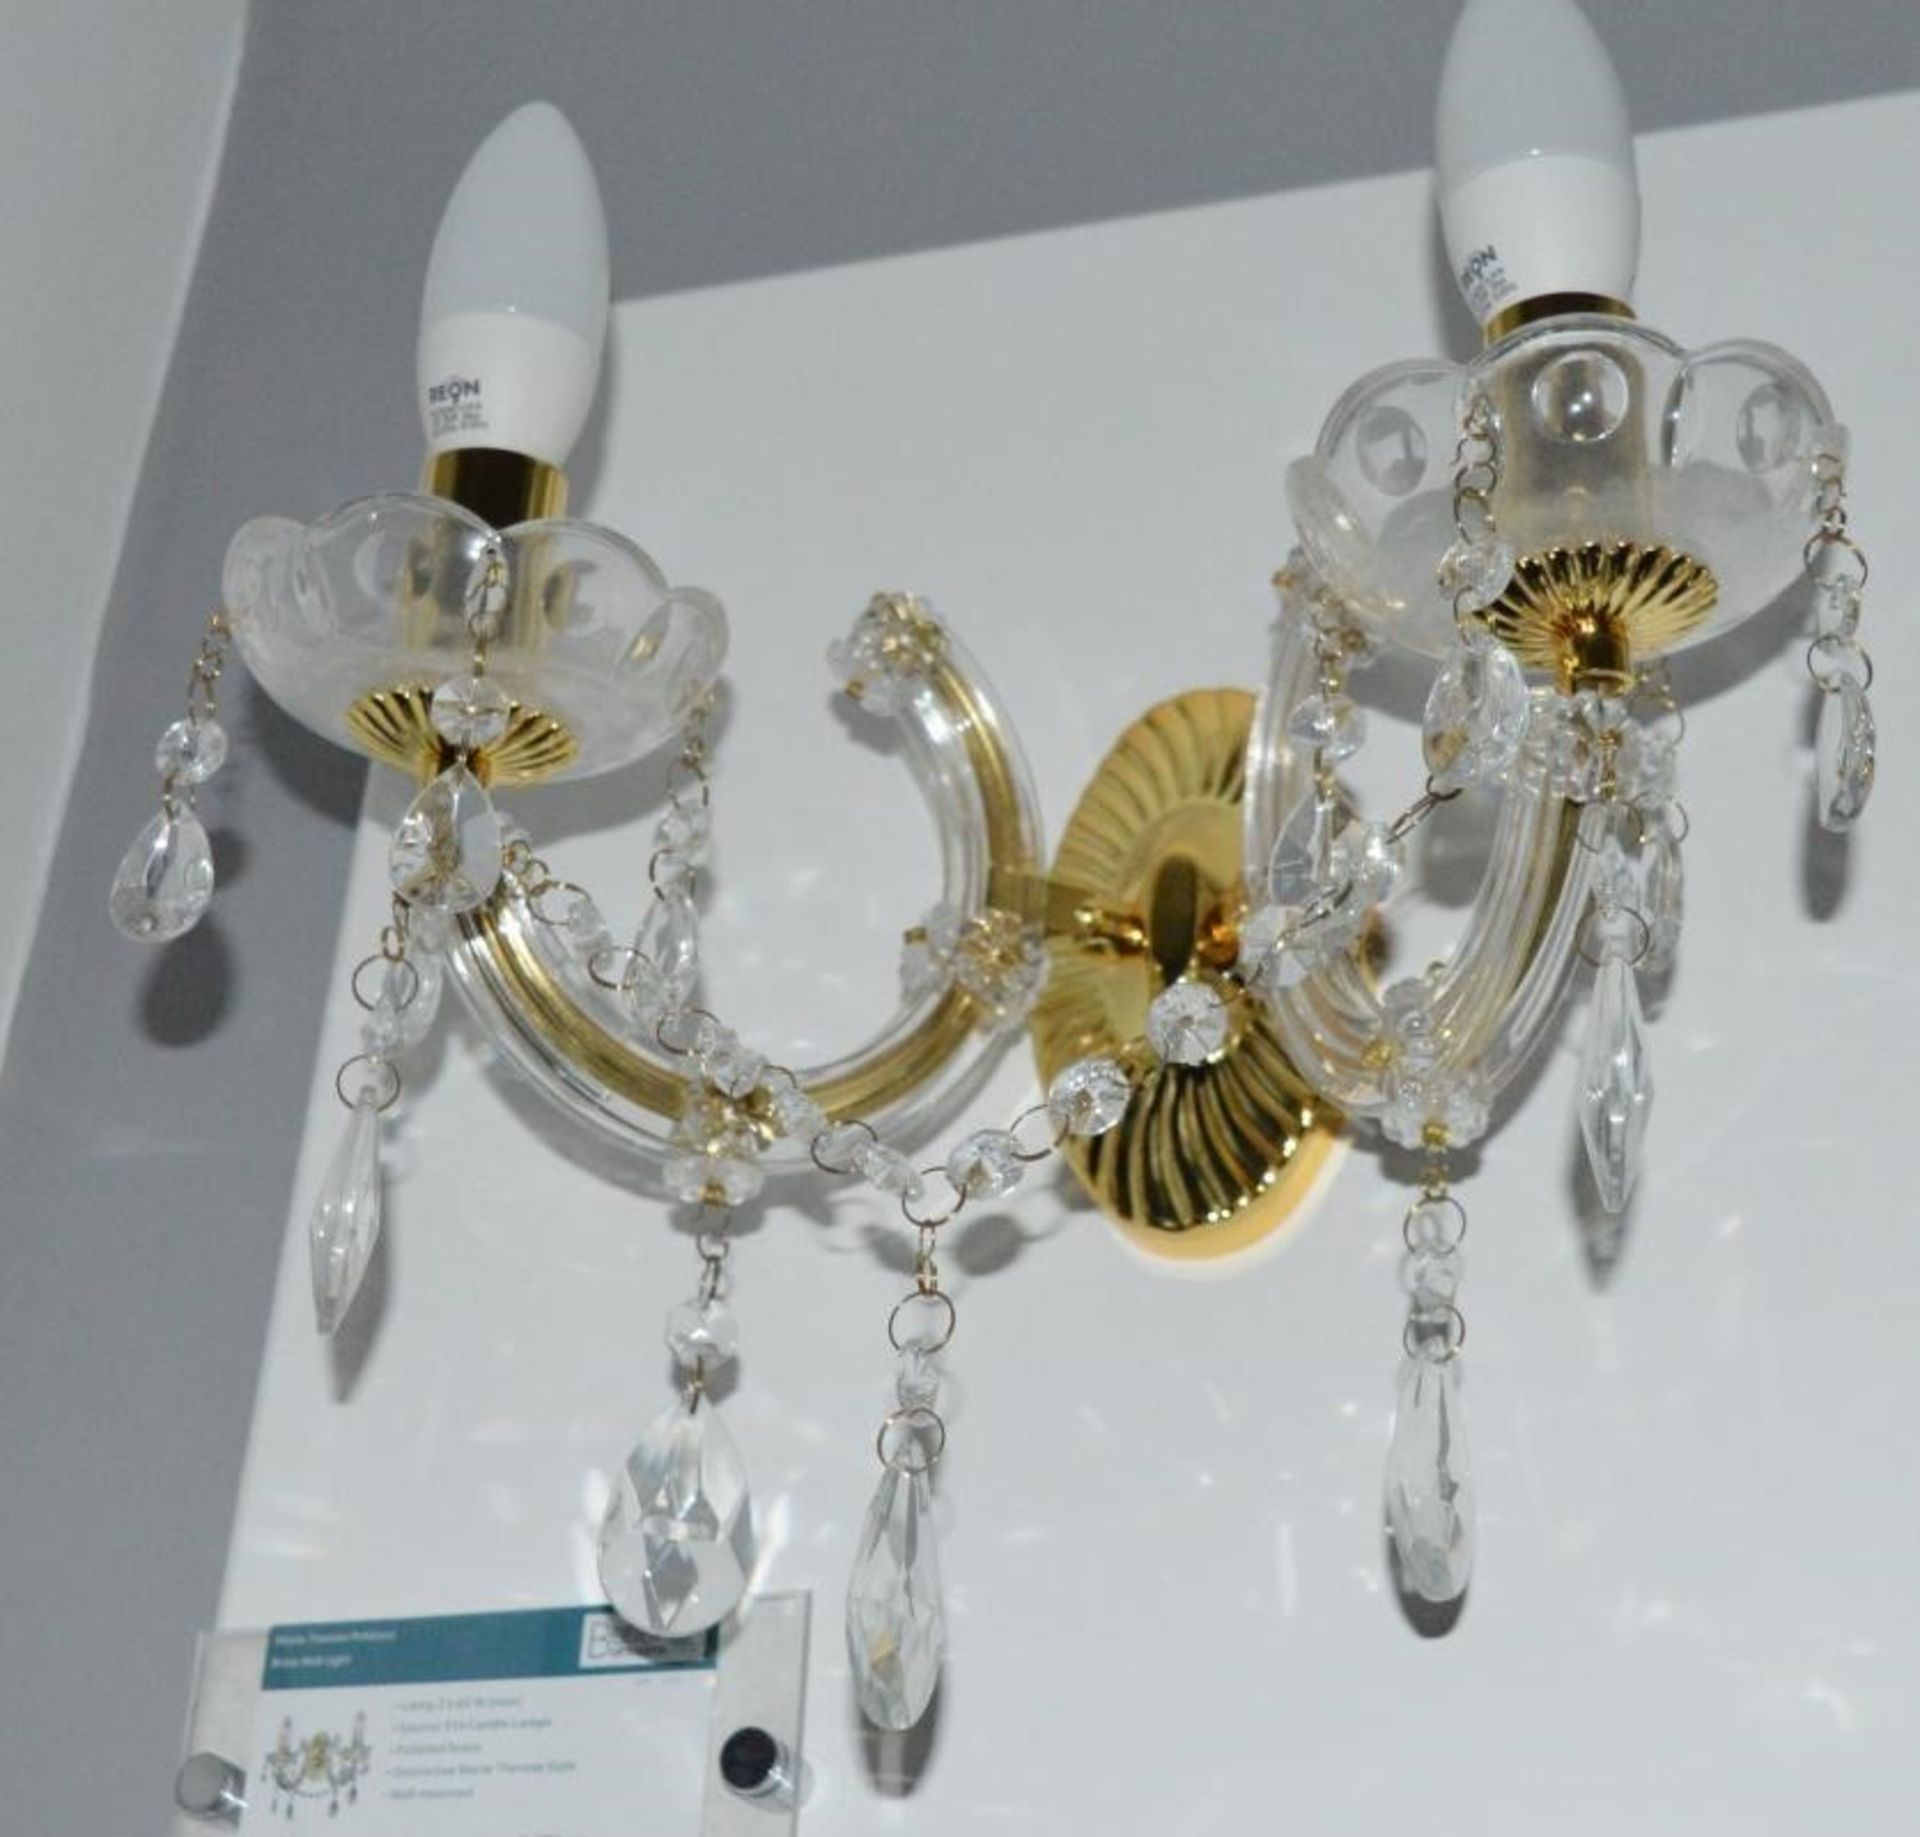 1 x Marie Therese Polished Brass 2 Light Wall Sconce With Crystal Drops - Ex Display Stock - CL298 - - Image 3 of 3